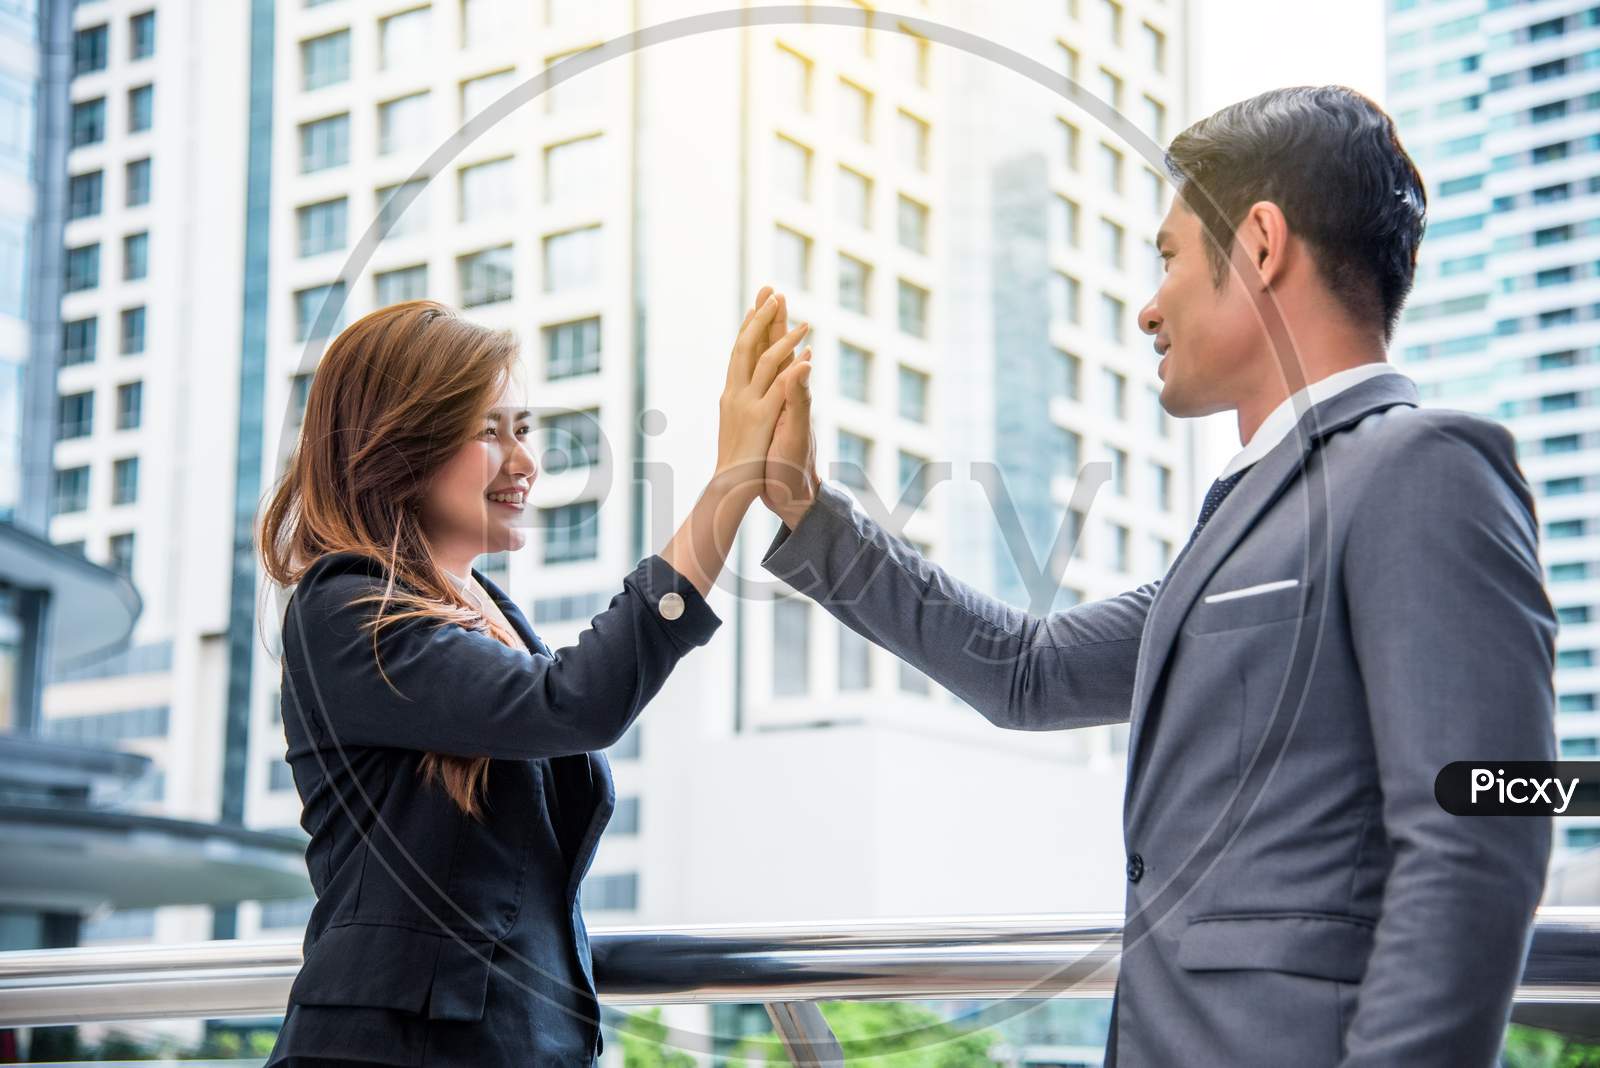 Businessman And Business Woman Doing High Five, Business Concept, Successful Concept, Cooperation Concept